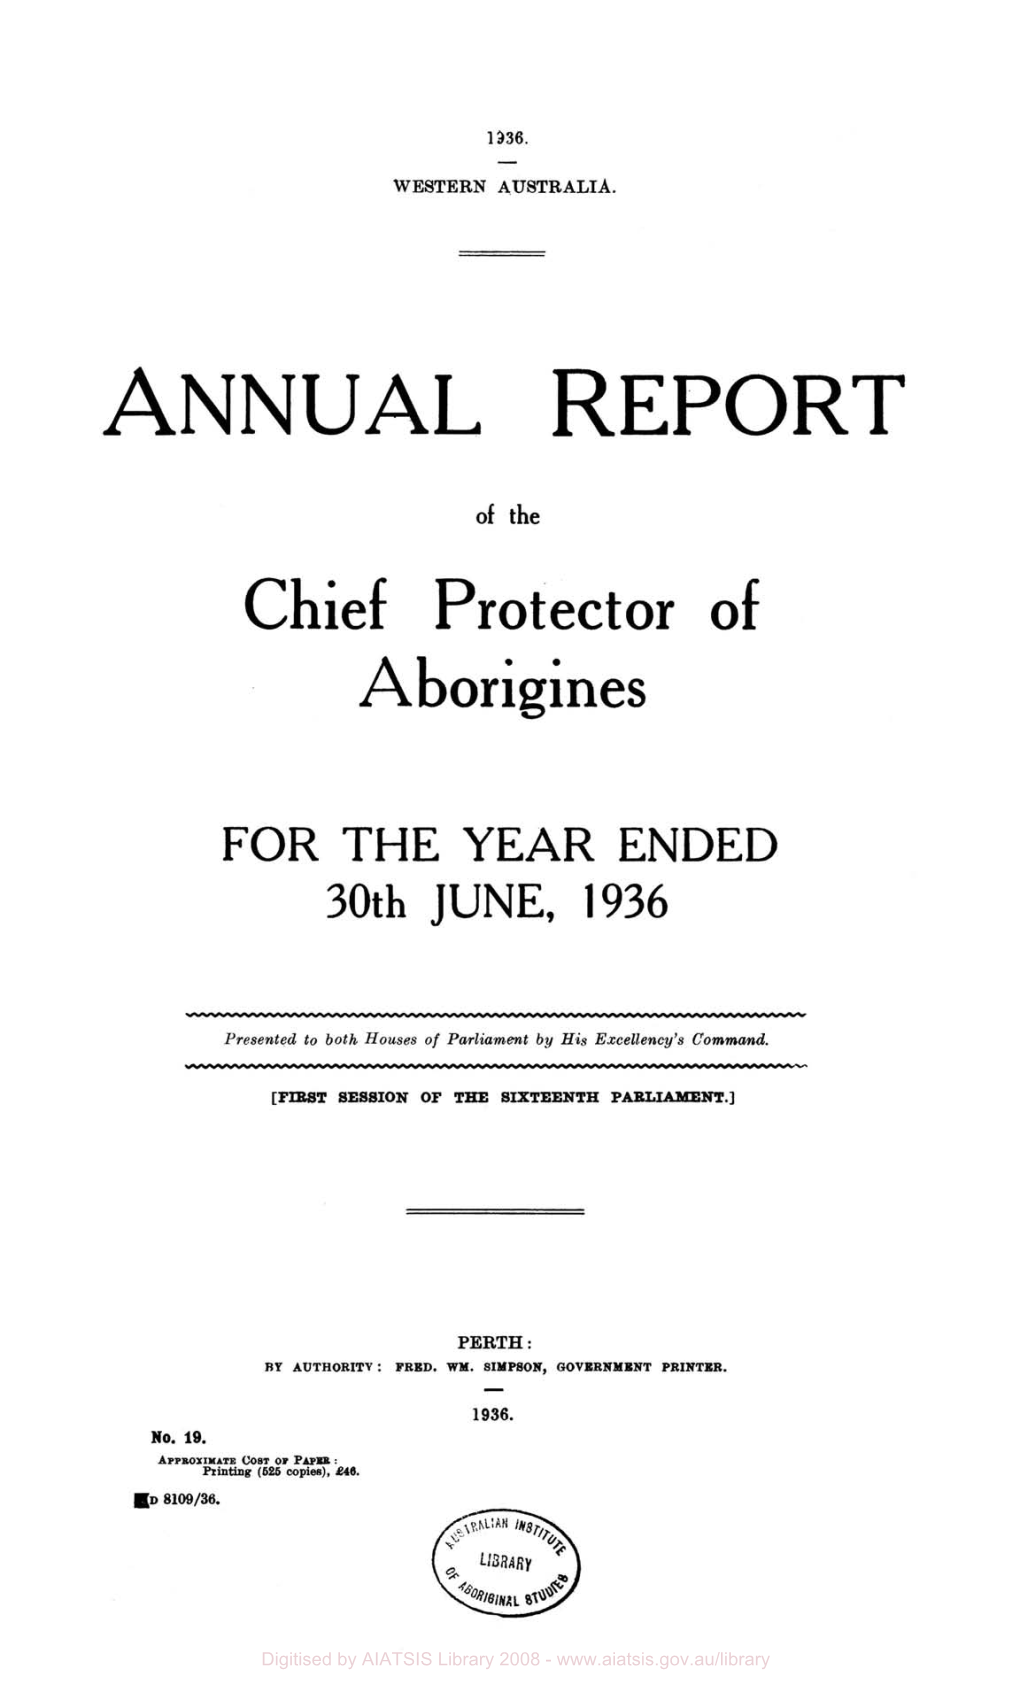 Annual Report of the Chief Protector of Aborigines for the Year Ended 30Th June 1936 by Authority: FKKD